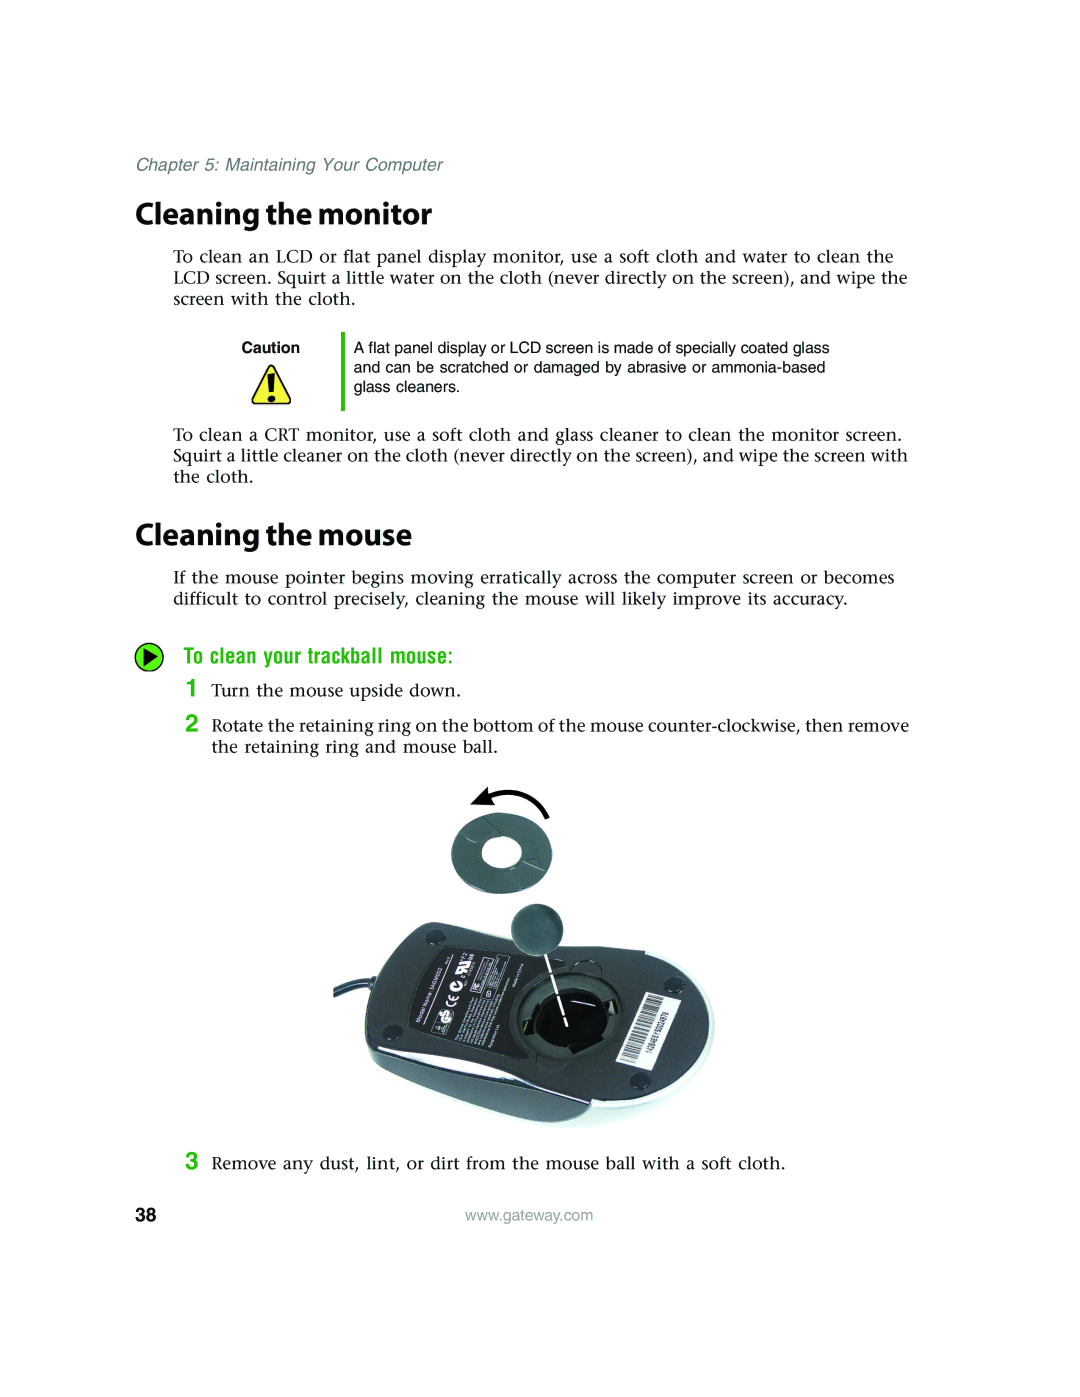 Gateway E4350 manual Cleaning the monitor, Cleaning the mouse, To clean your trackball mouse 